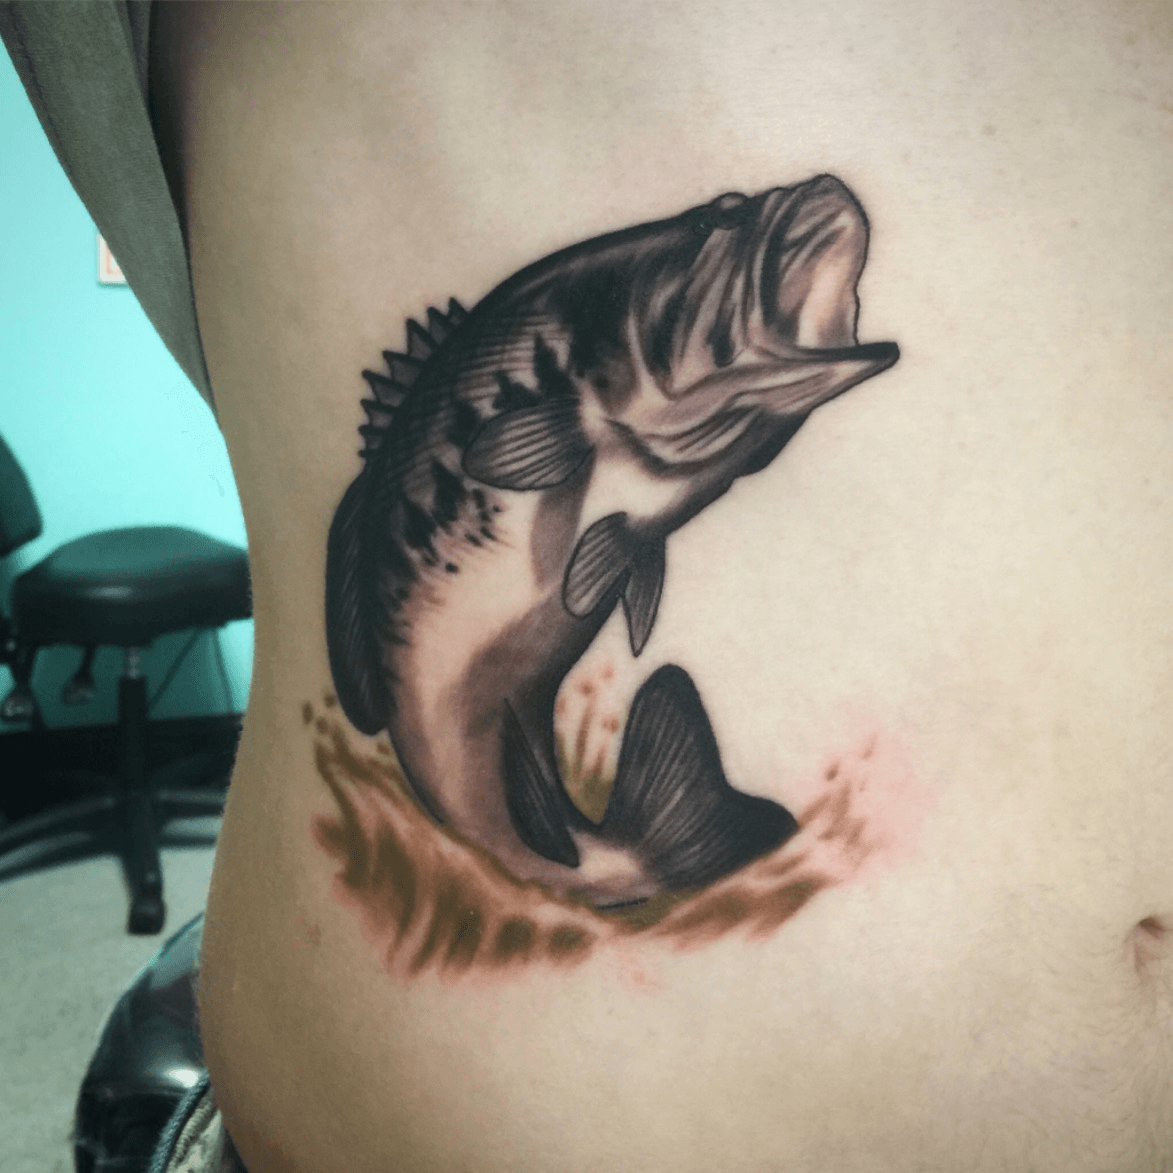 Bring me more badass fish tattoos to do like this throwback #highmarktattoo  #brewcrewink #smallmouthbass #fishingtattoo #thesolidink #ink